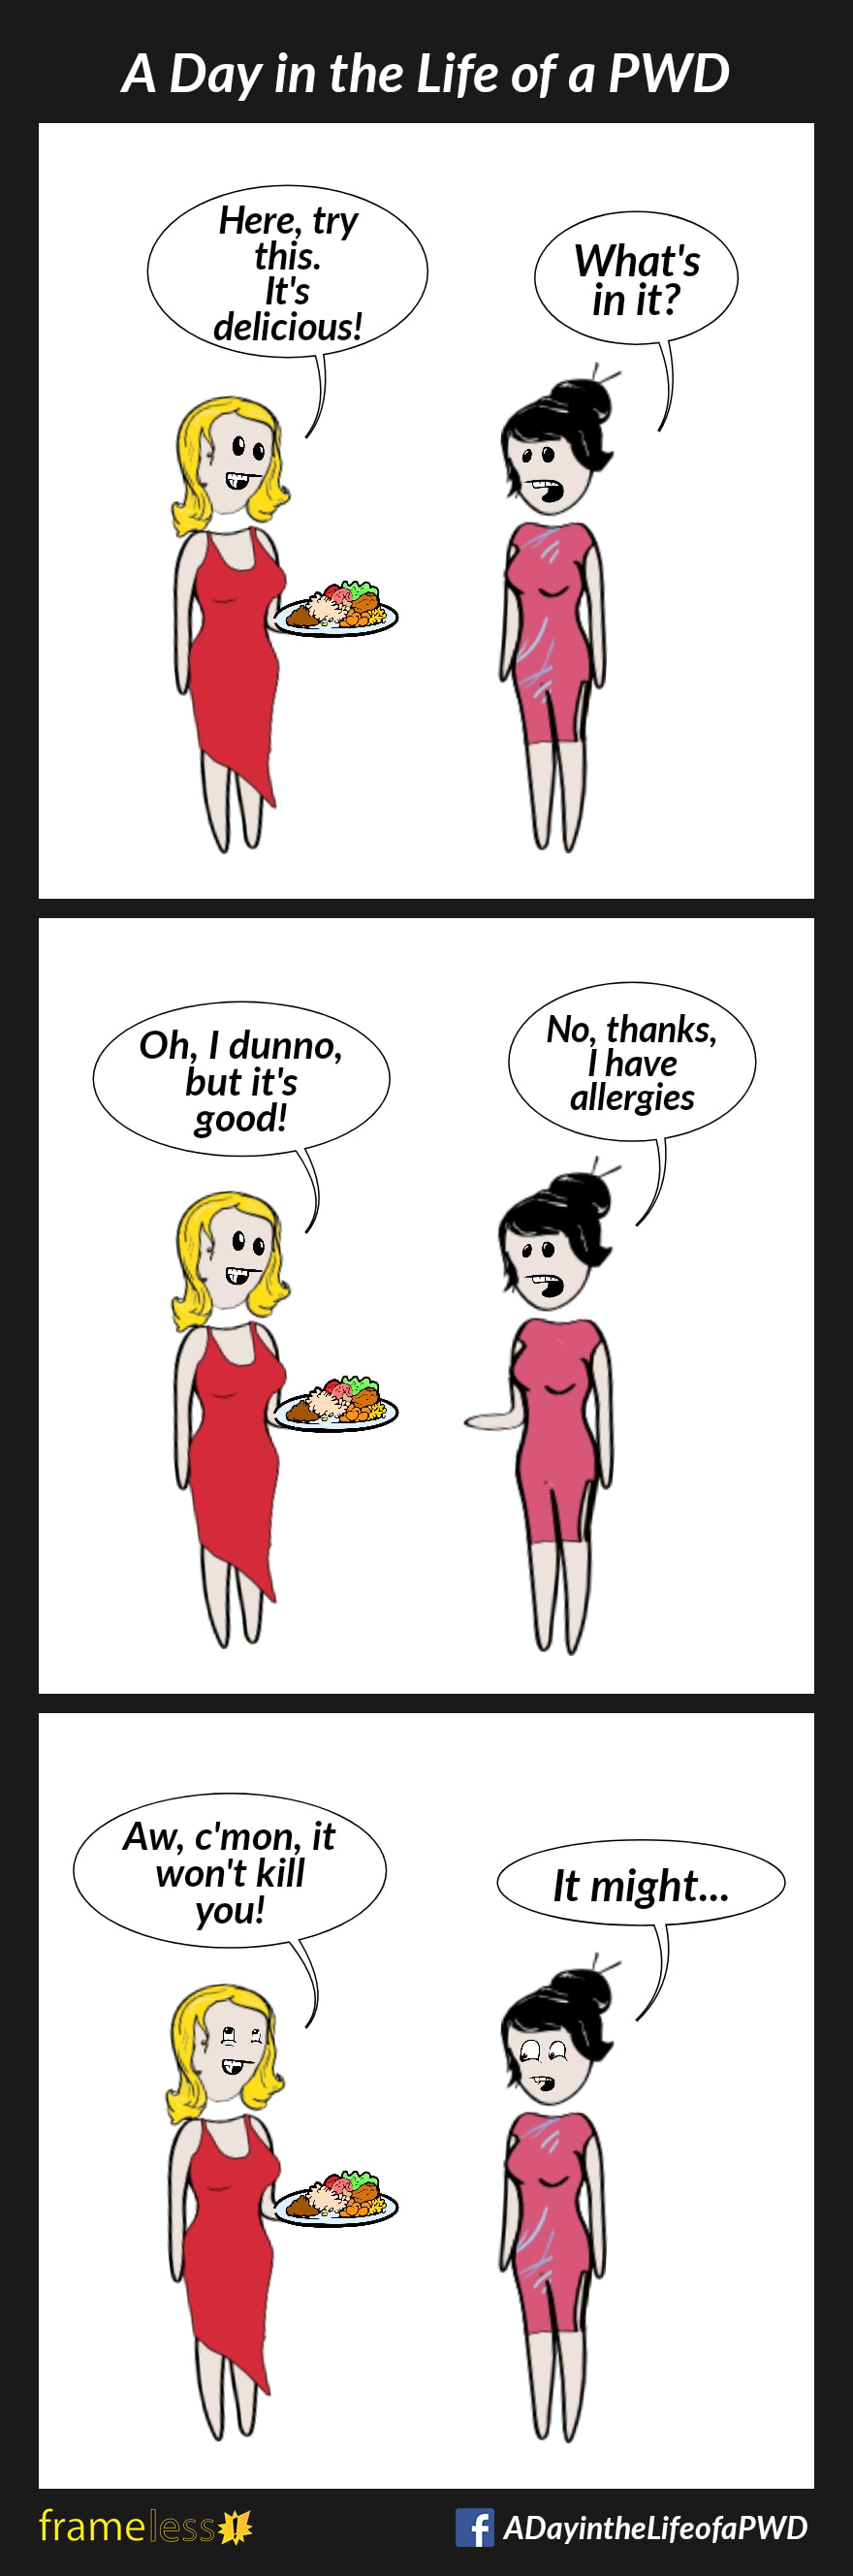 COMIC STRIP
A Day in the Life of a PWD

Frame 1:
A woman is talking to a friend who is holding a plate of food.
FRIEND: Here, try this. It's delicious!
WOMAN: What's in it?

Frame 2:
Oh, I dunno, but it's good!
WOMAN: No thanks. I have allergies.

FRIEND: Oh, c'mon, it won't kill you!
WOMAN: It might...